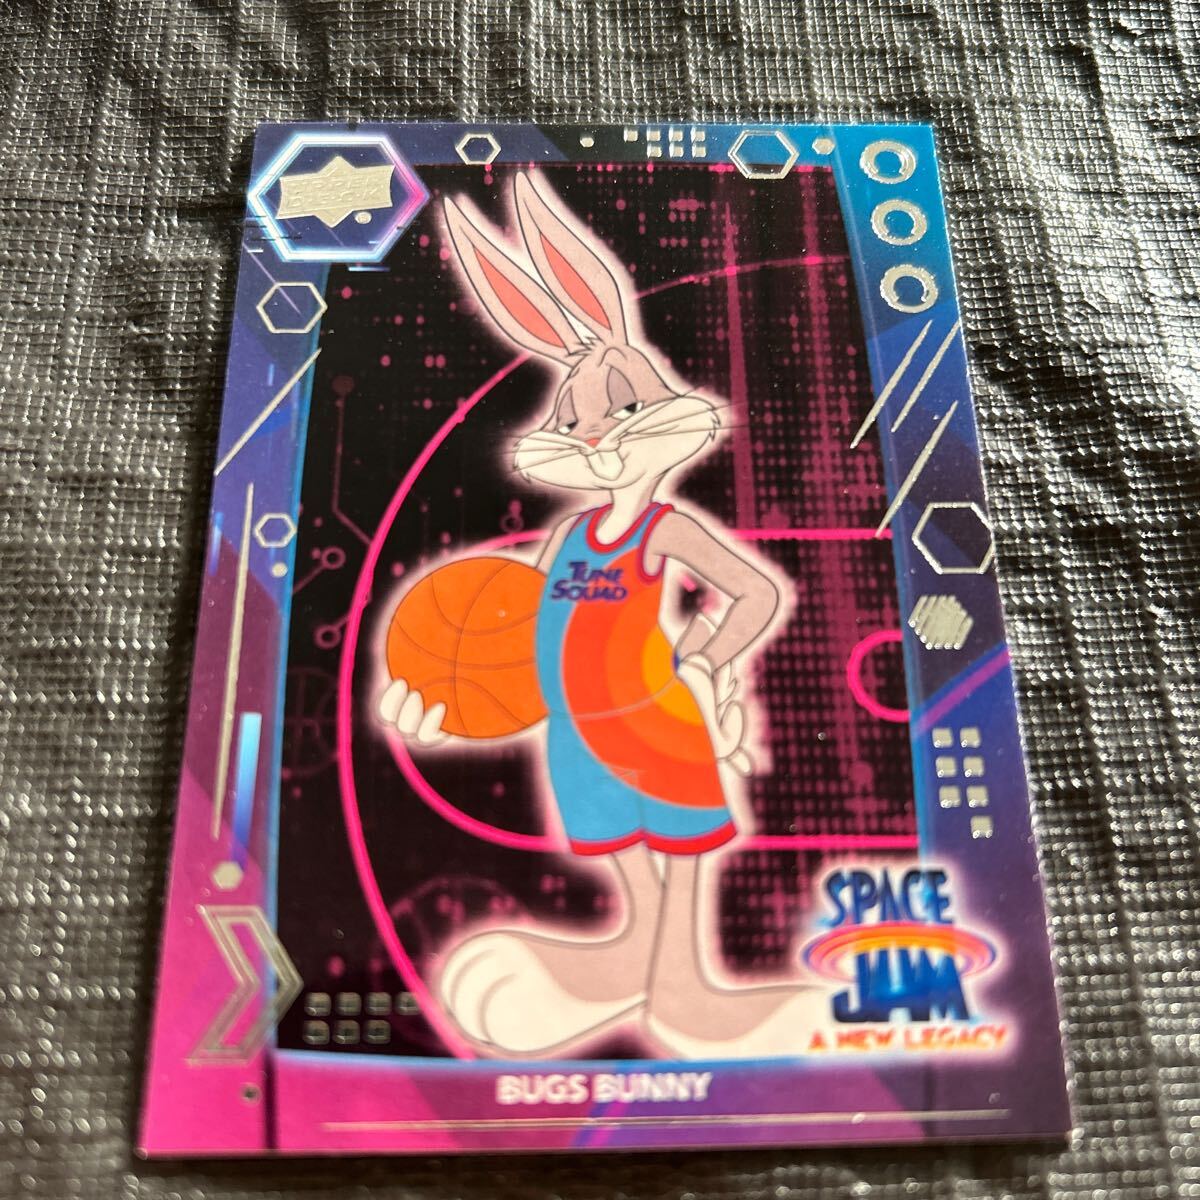 2021 UpperDeck Space Jam A New Legacy Lebron James 他10カード　レブロンジェームス　ロスアンゼルスレイカーズ_画像5